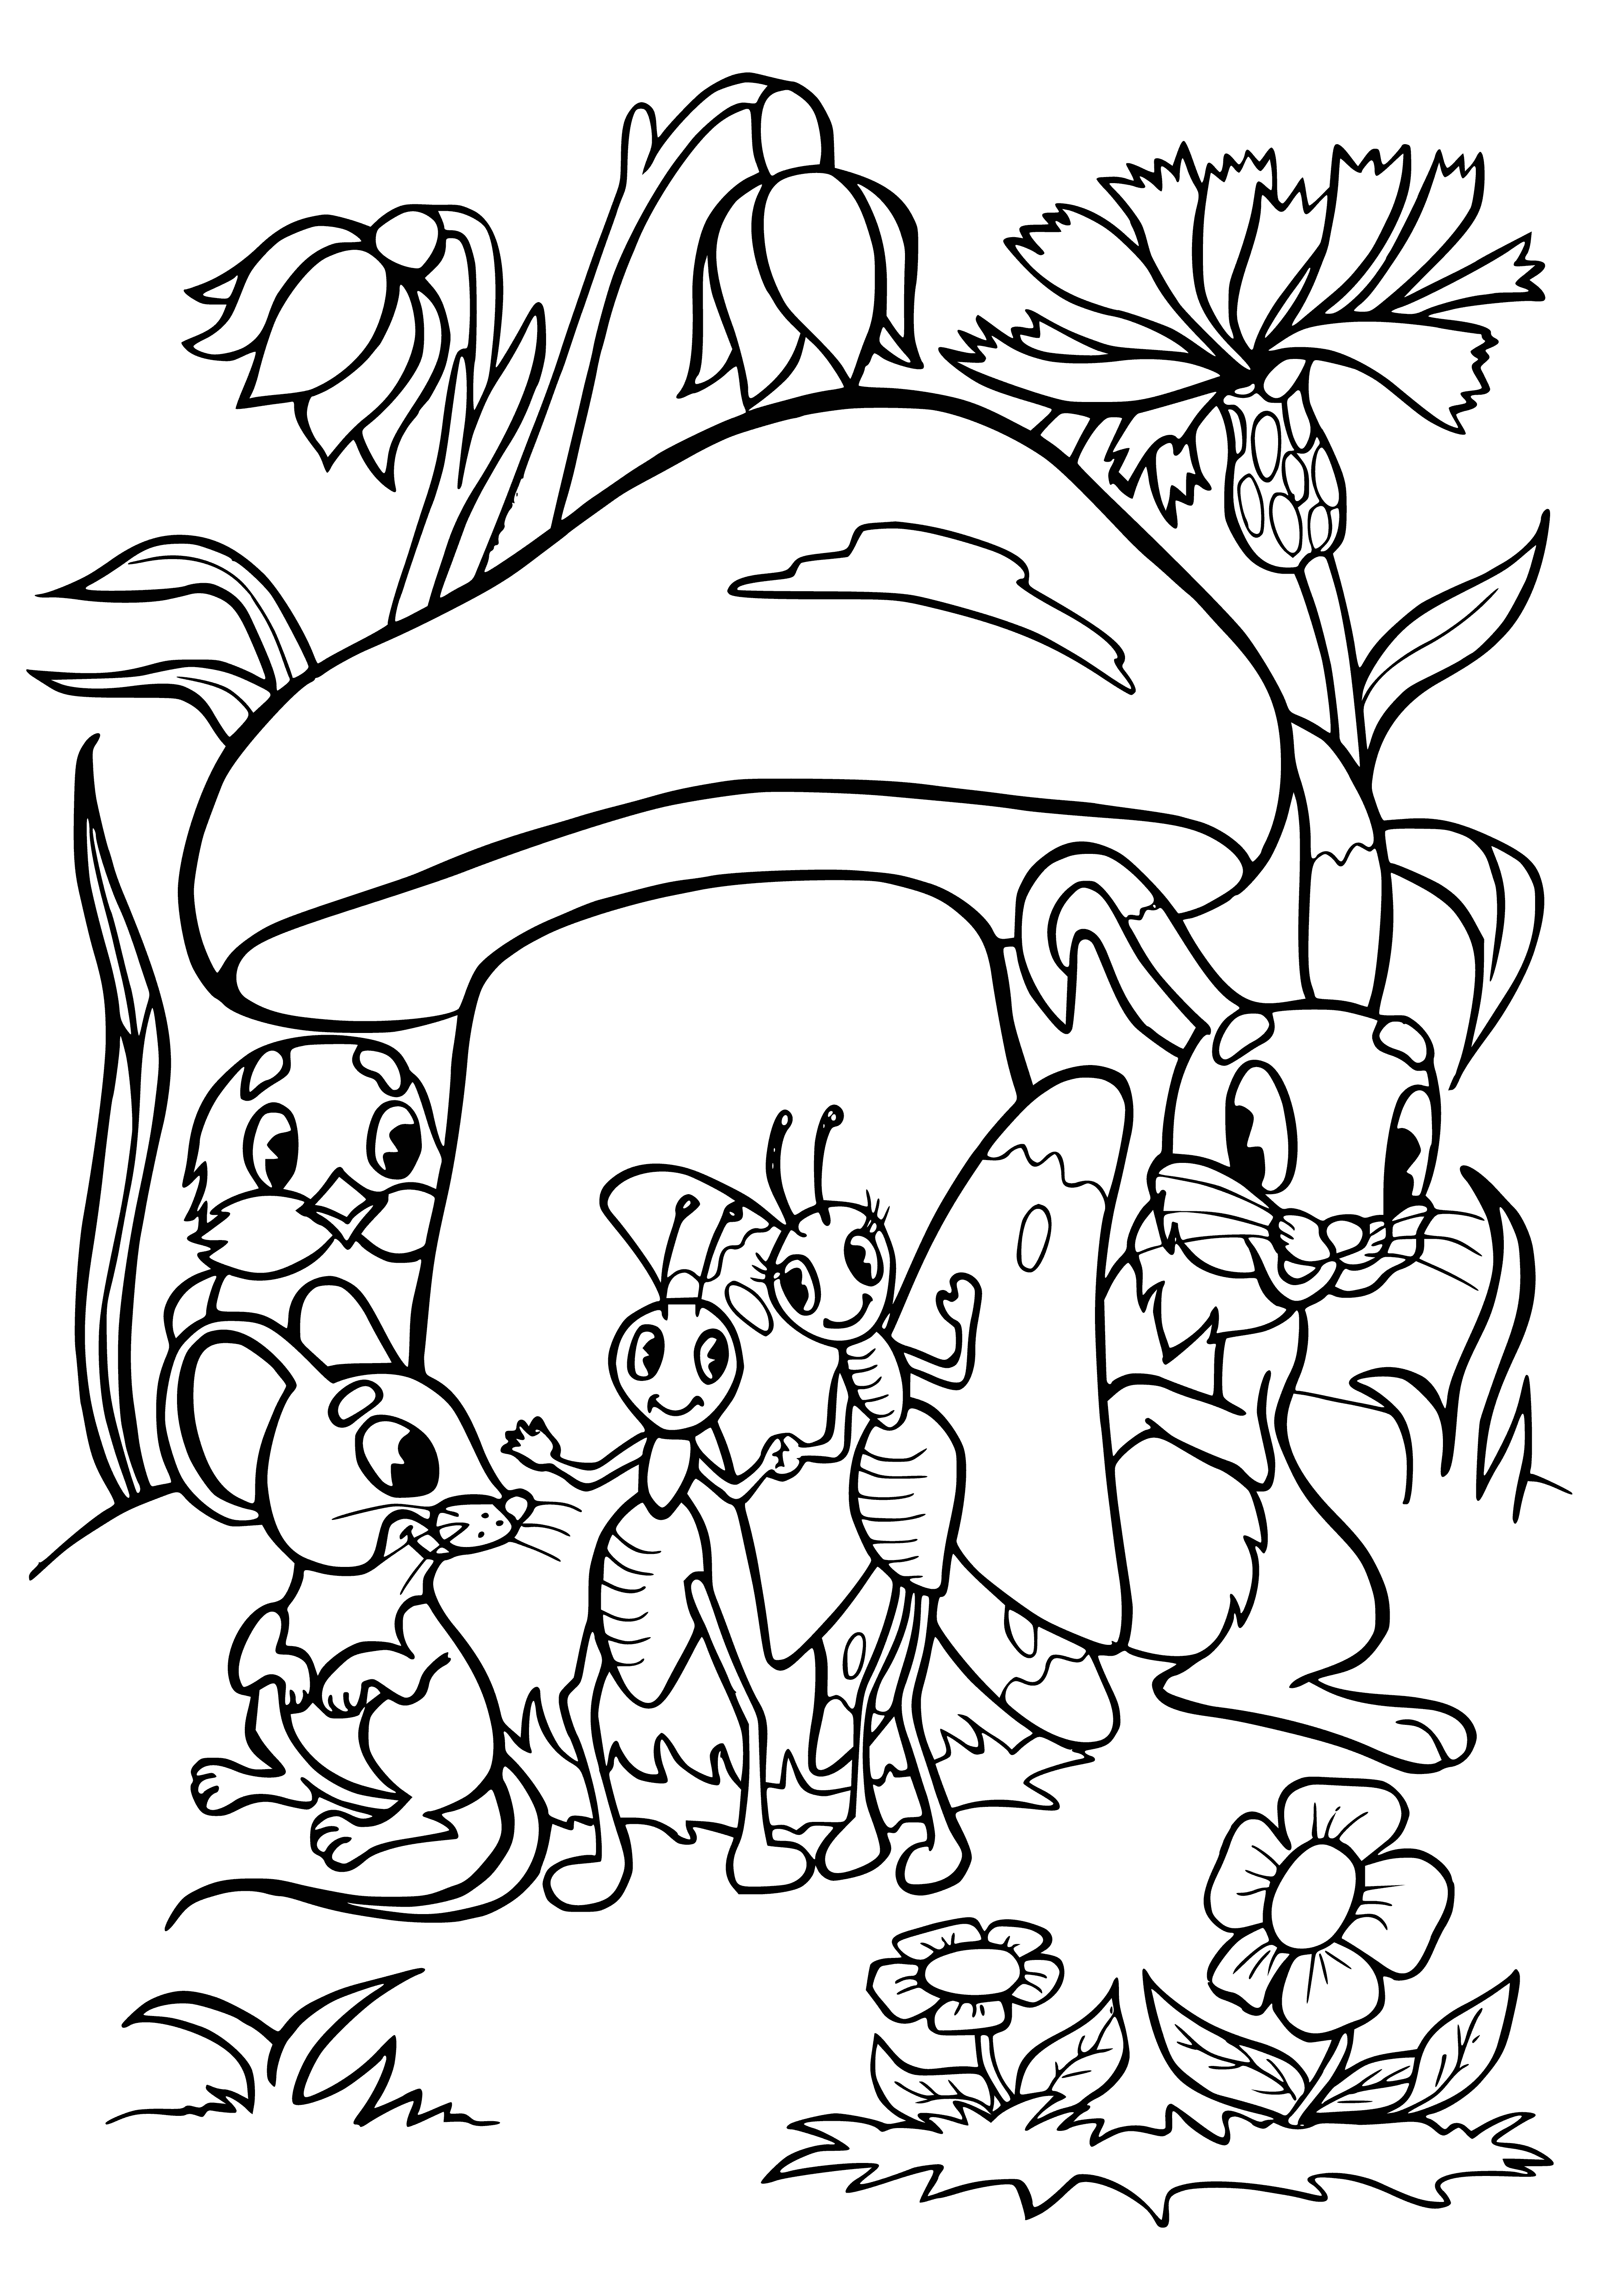 coloring page: In a crowded scene, a large mushroom w/ a human face is surrounded by small creatures trying to find a spot on it.